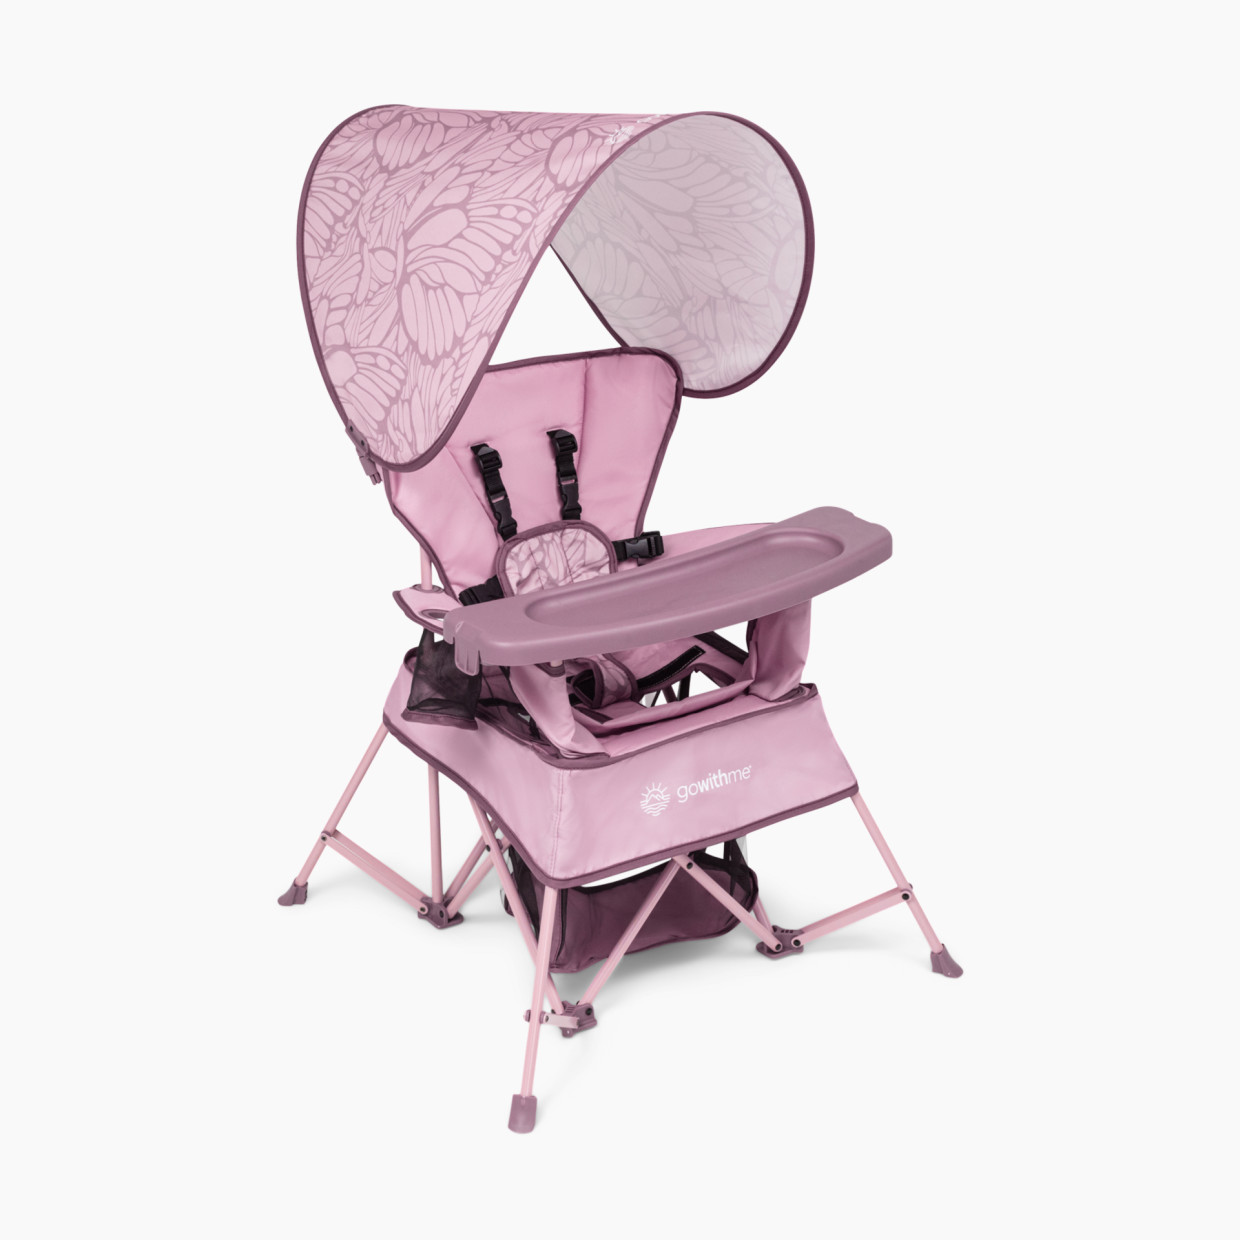 Baby Delight Go With Me Venture Deluxe Portable Chair - Canyon Rose.